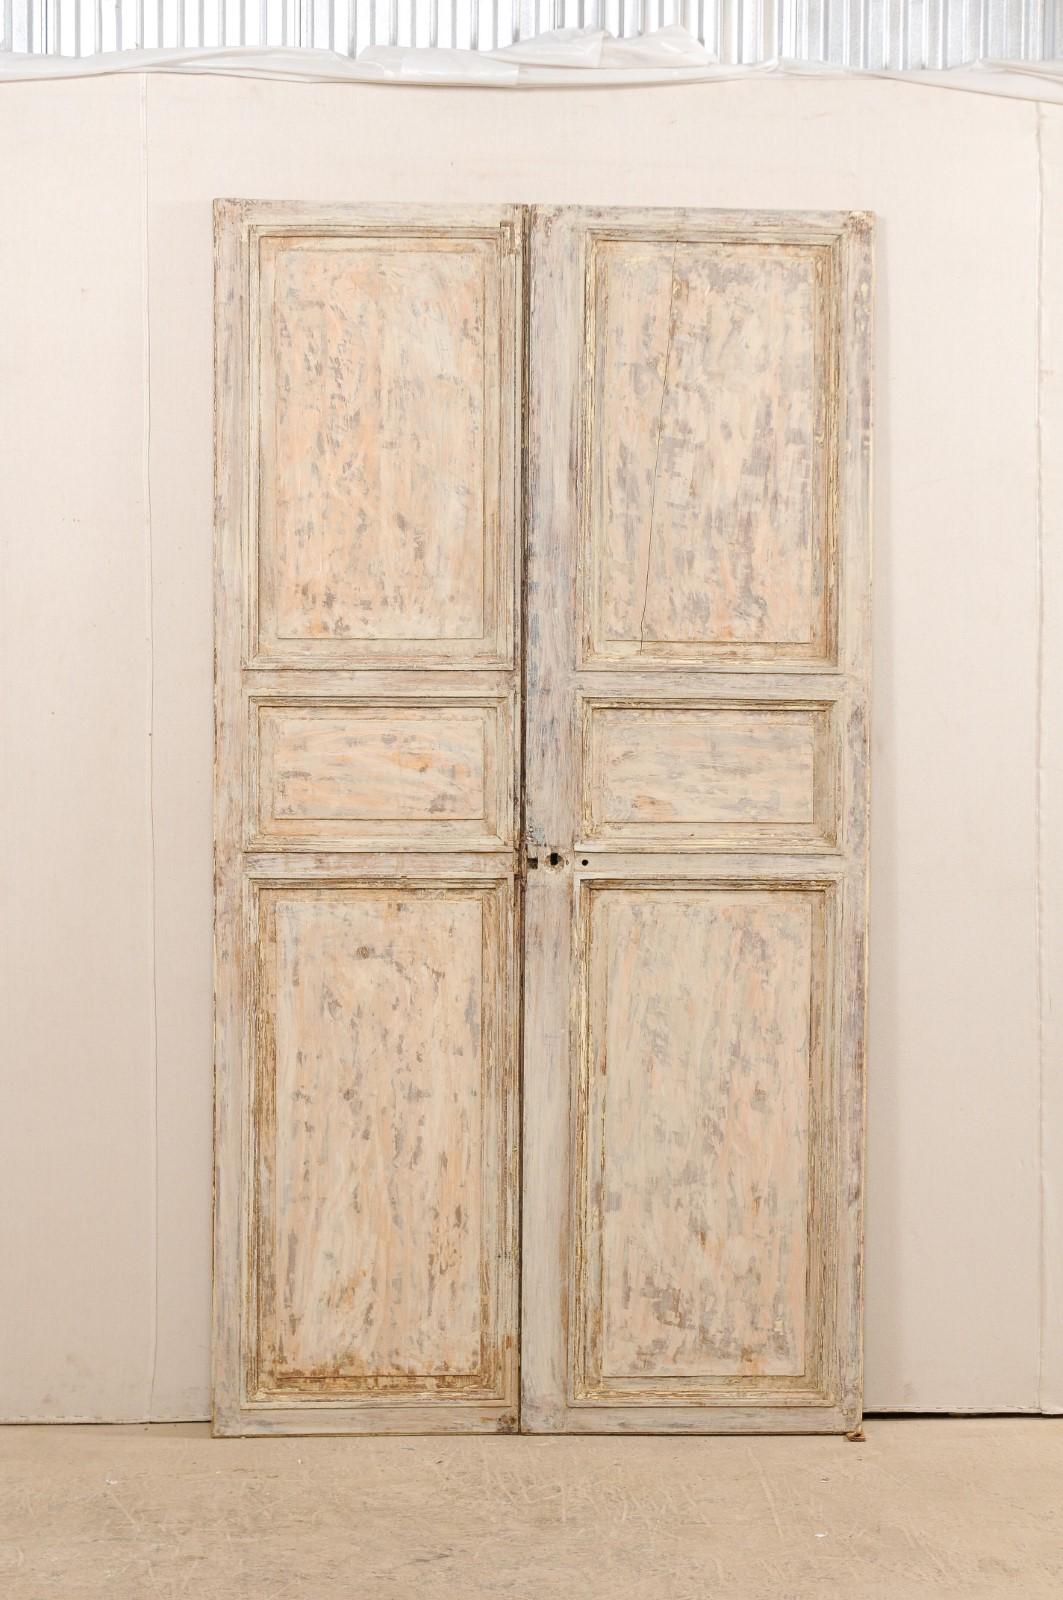 A pair of French doors from the 19th century. This pair of French doors, just over 8 feet in height, each have three recessed panels at front and backsides, with smaller center panel flanked between longer ones at the top and bottom sections of the